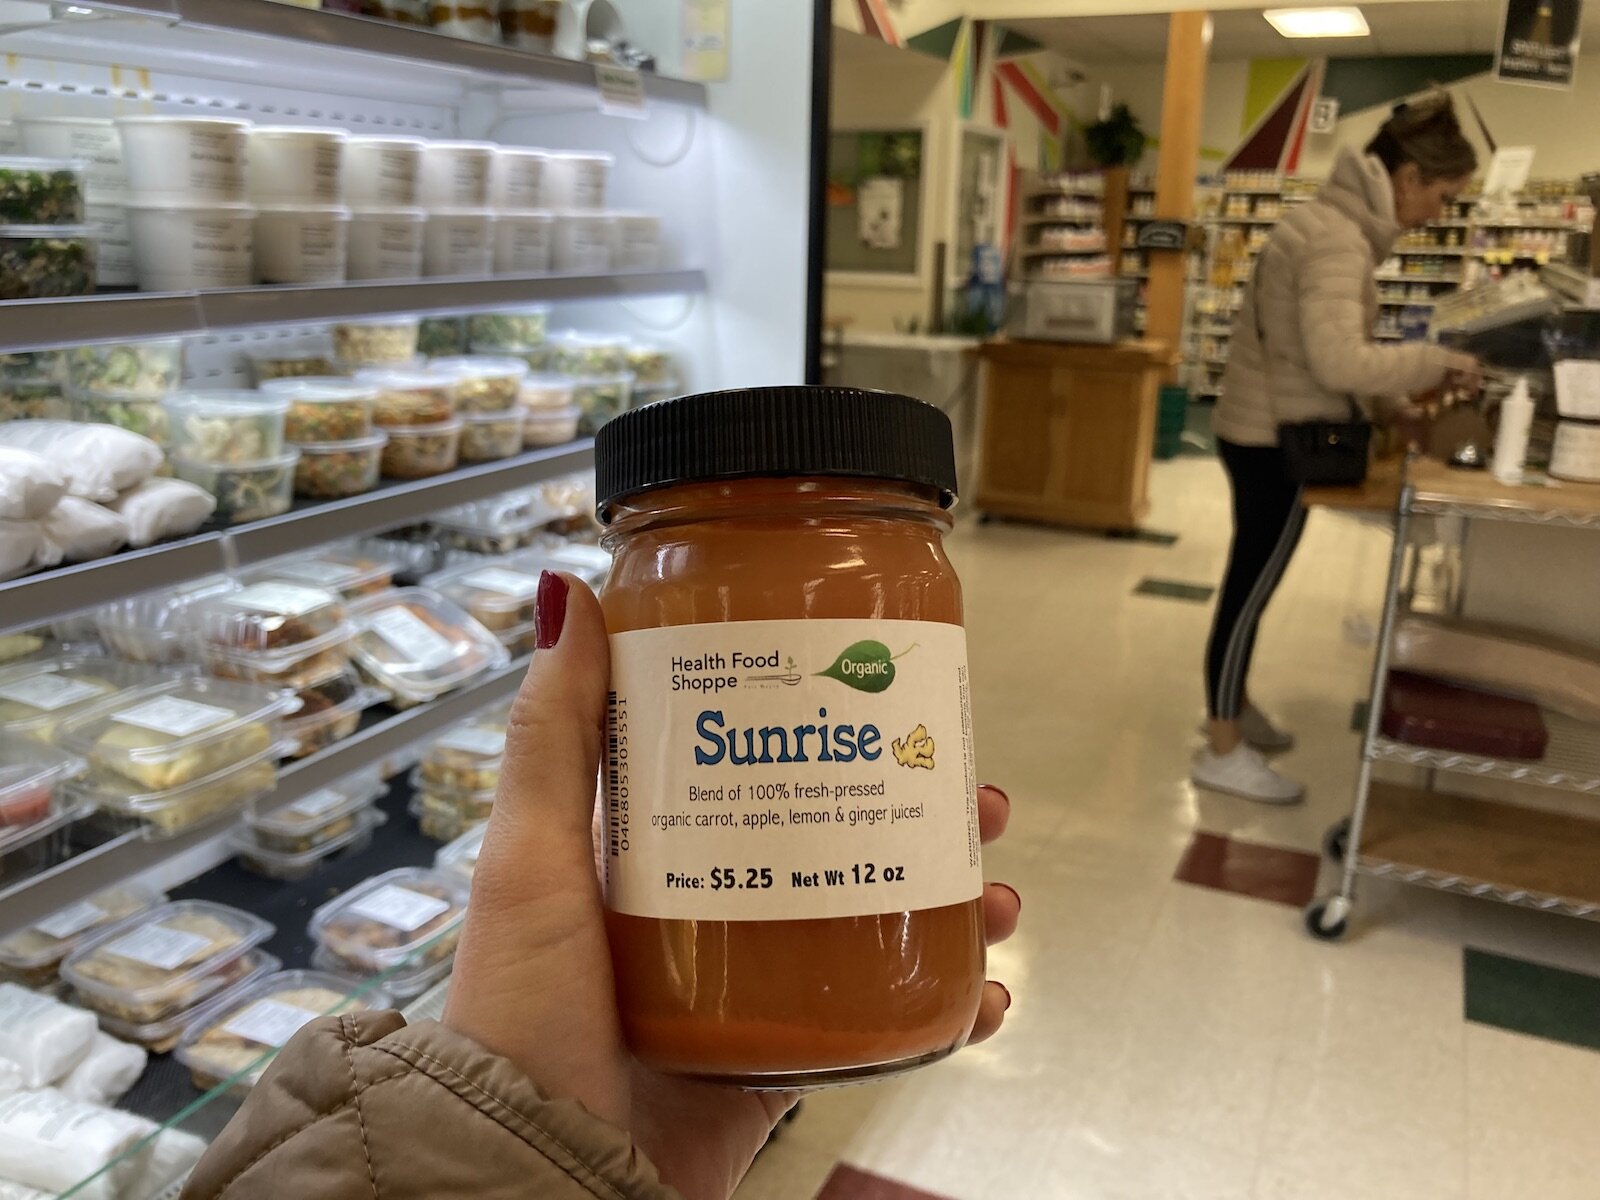 Sunrise juice made fresh by the Health Food Shoppe is a staff favorite.